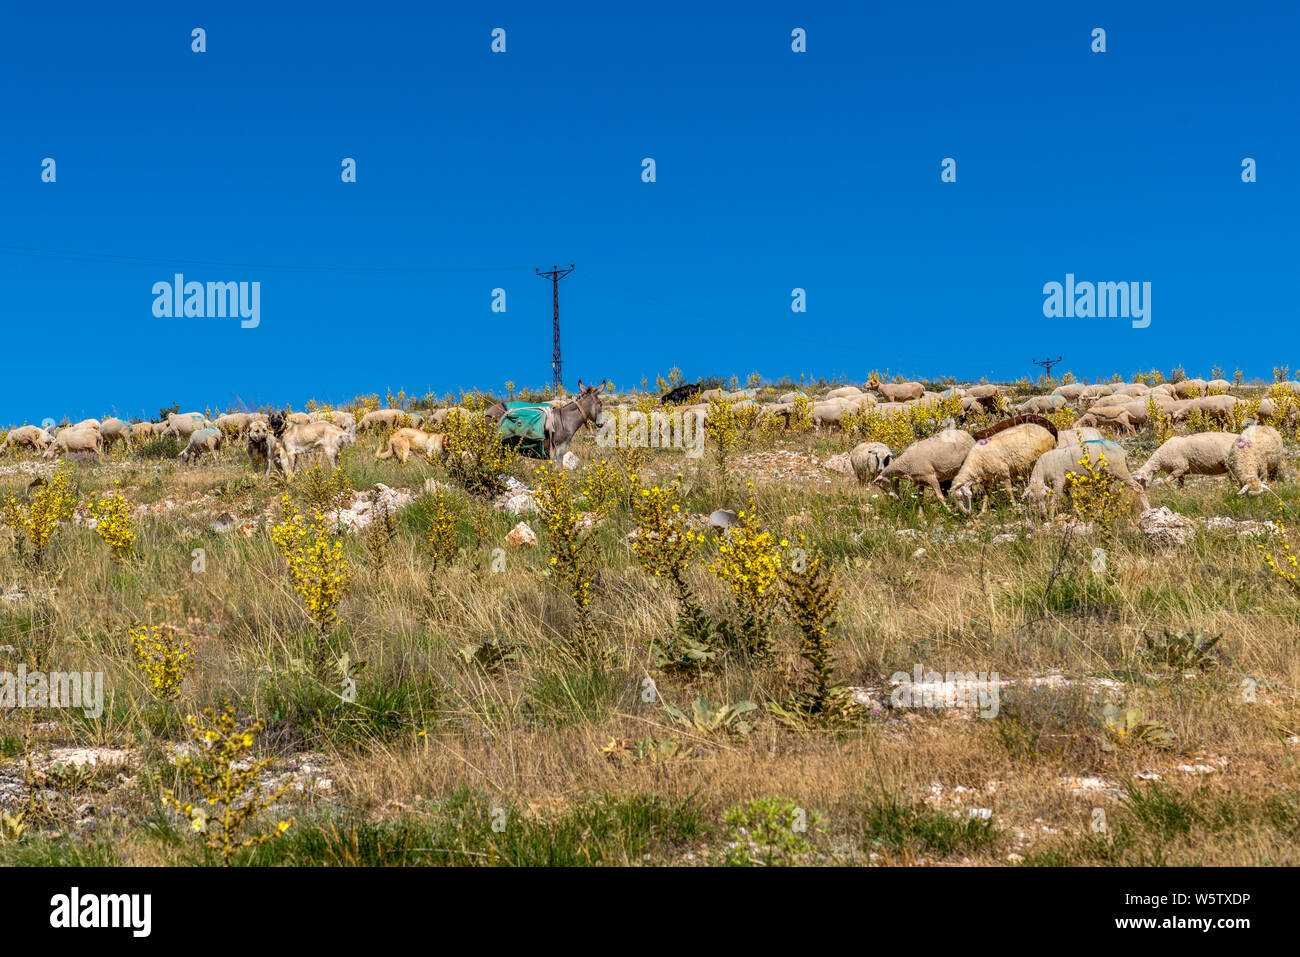 Herd of colored sheep feeding on a hill, sheep, kangal dogs and donkey together, Turkey Stock Photo